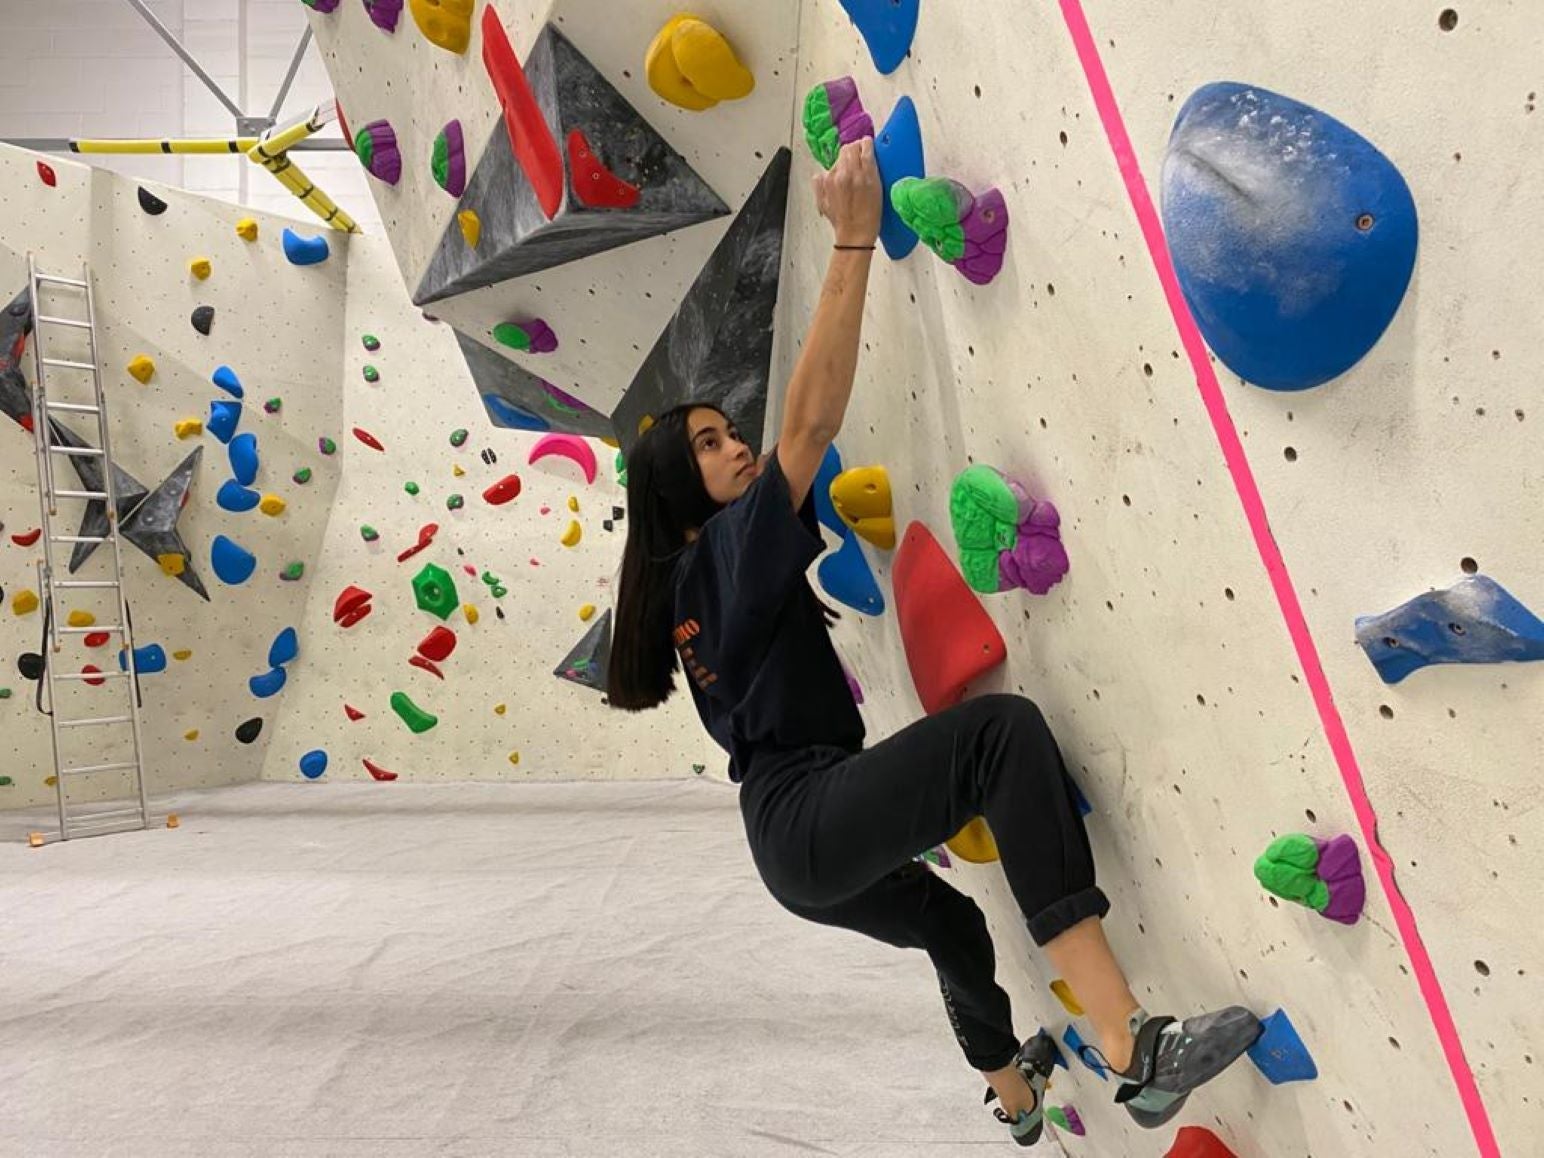 As rock climbing comes to the Olympics, what will it do for inclusivity in the sport?